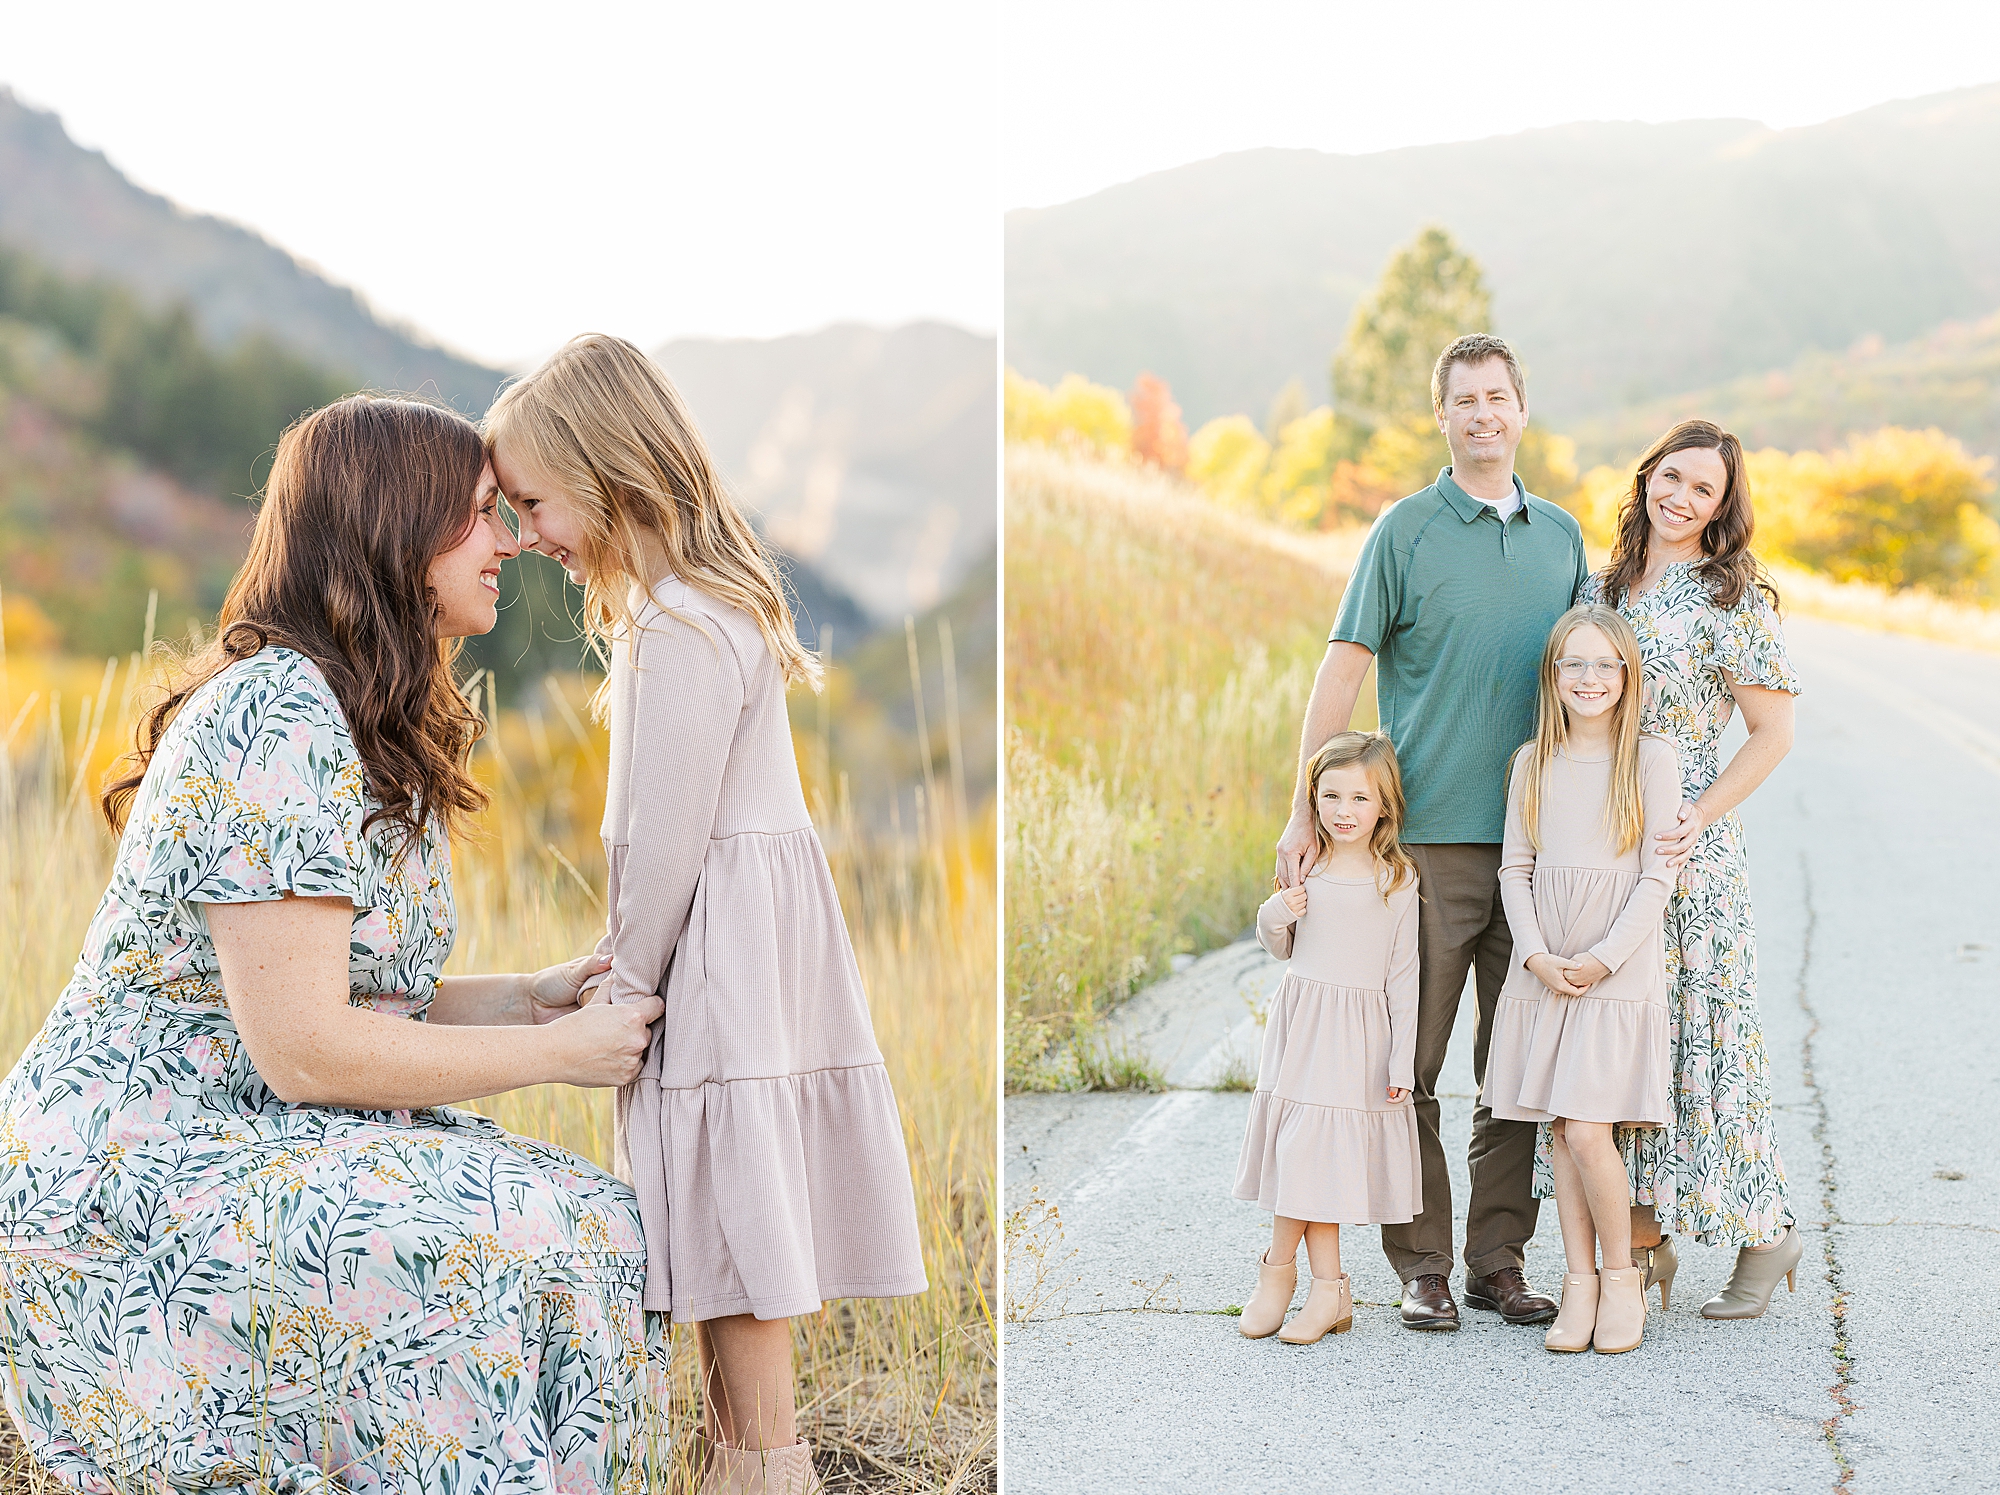 Family portrait enriched by the tapestry of Snow Basin's fall colors.